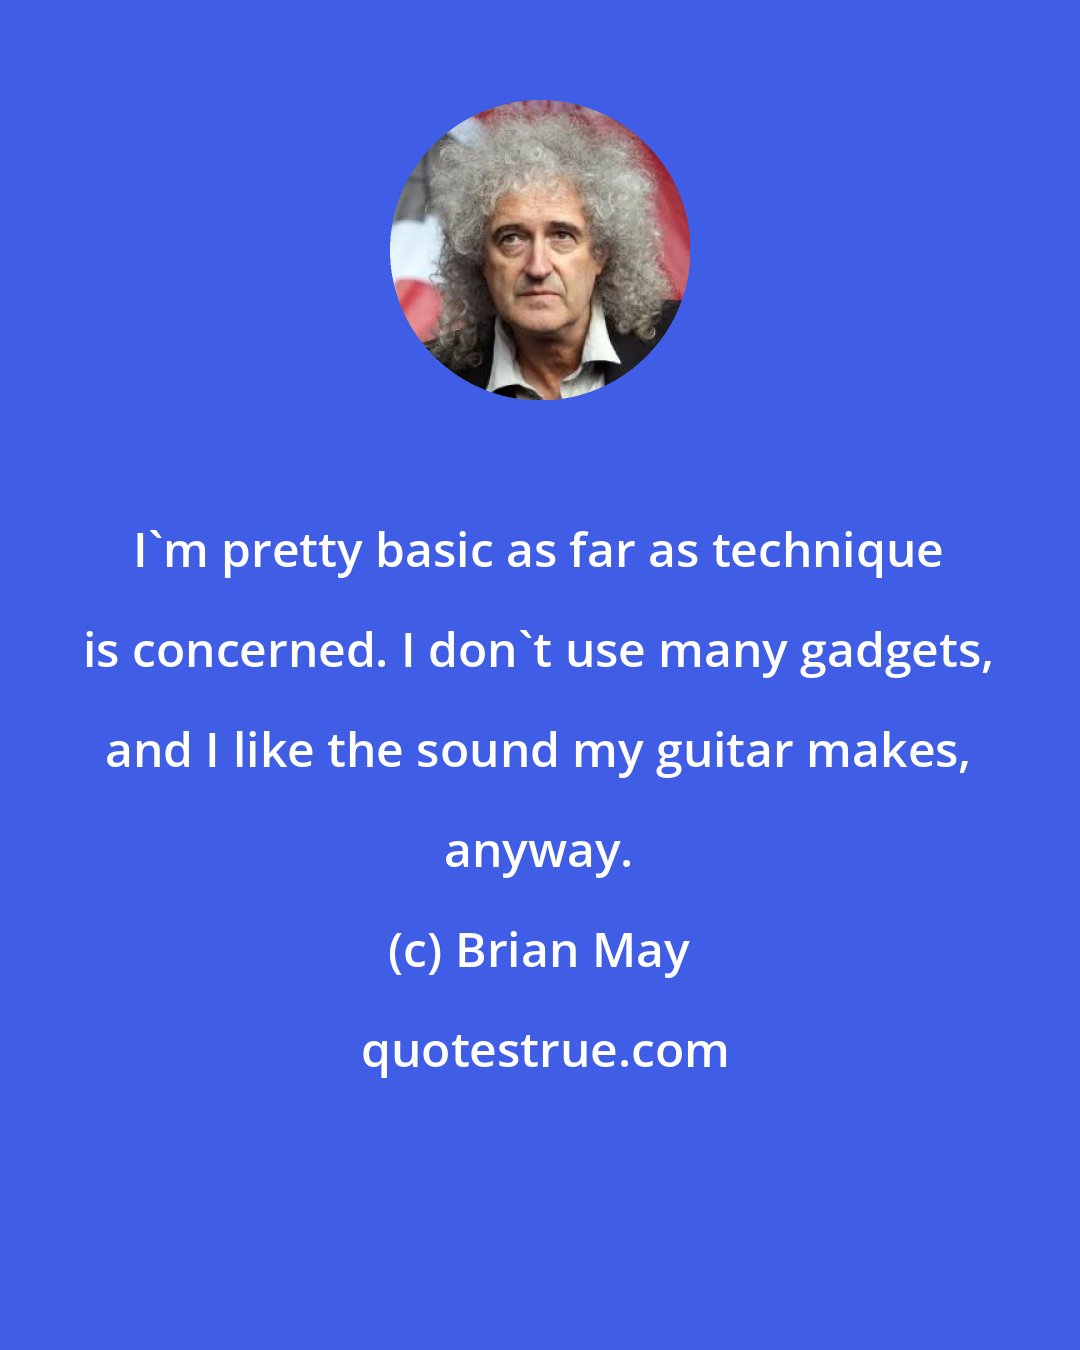 Brian May: I'm pretty basic as far as technique is concerned. I don't use many gadgets, and I like the sound my guitar makes, anyway.